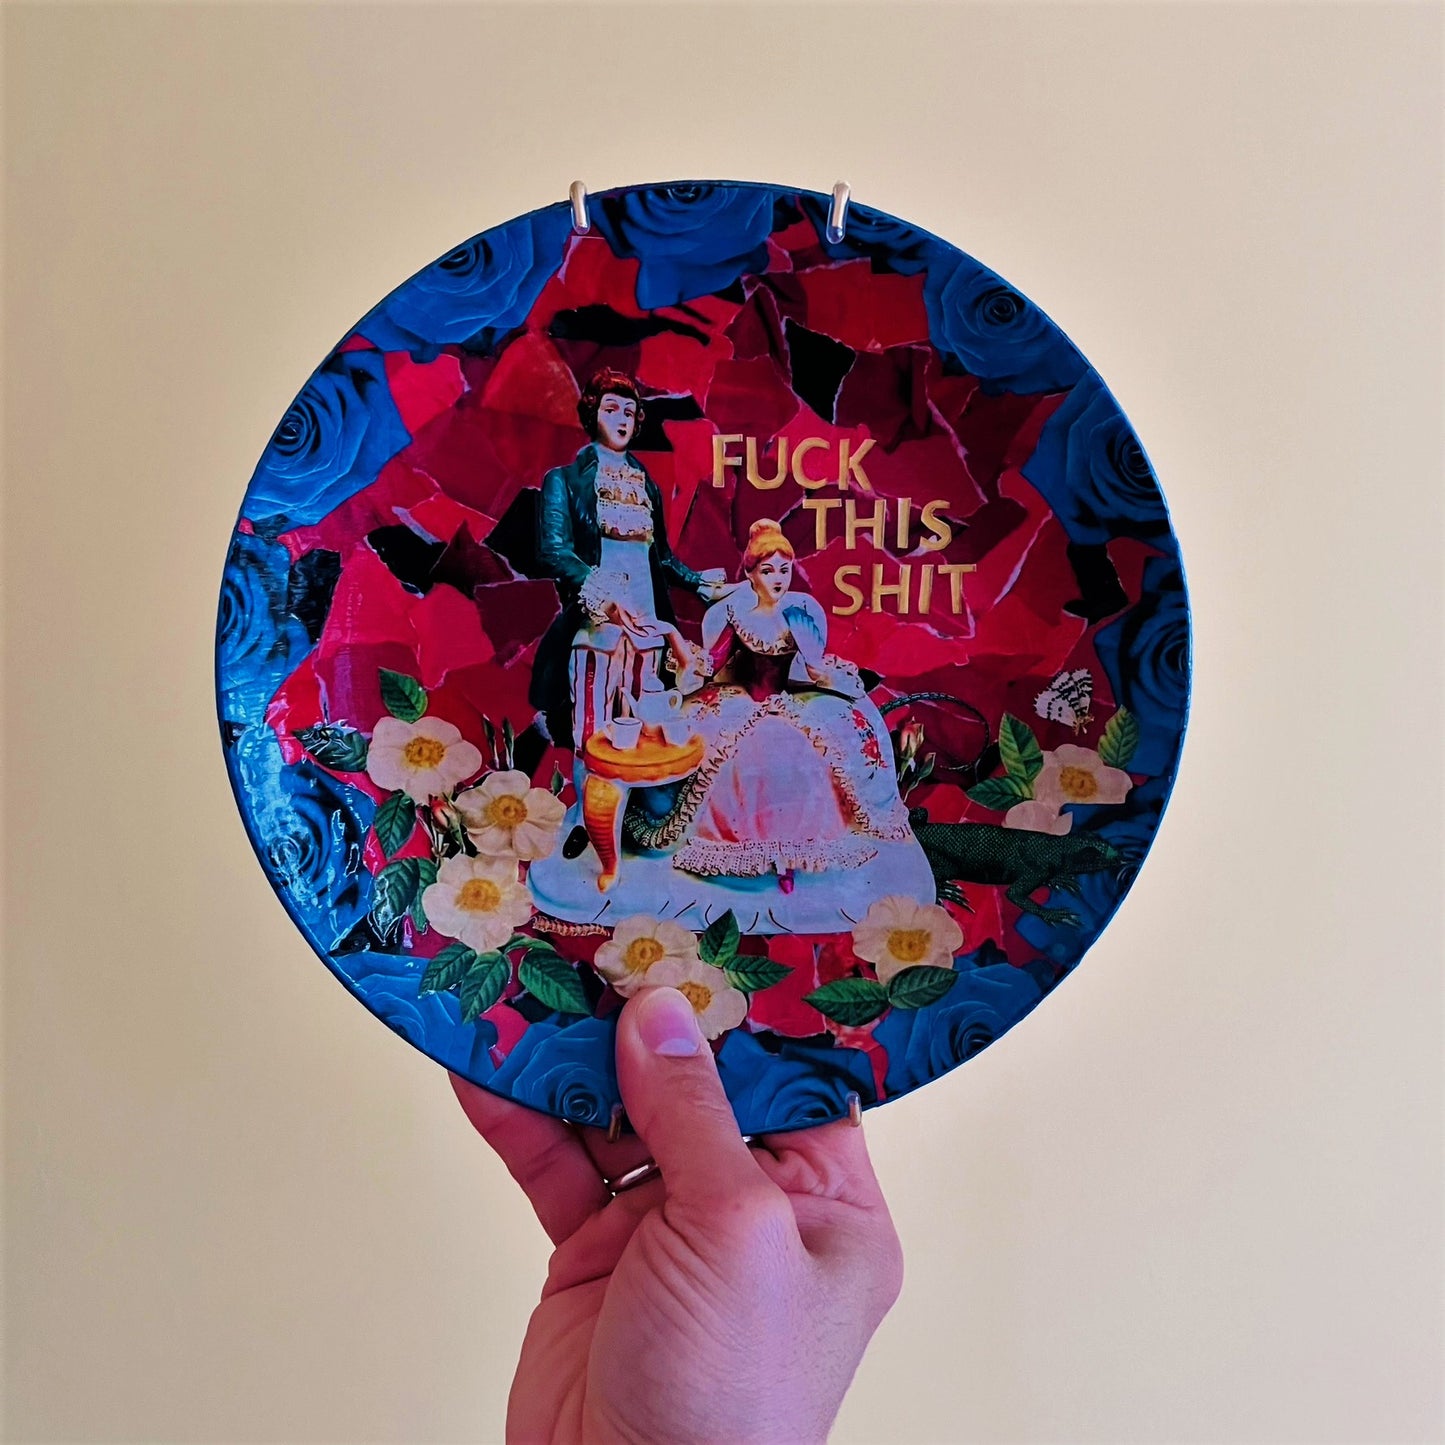 Red Upcycled Wall Plate - "Fuck This Shit" - by House of Frisson